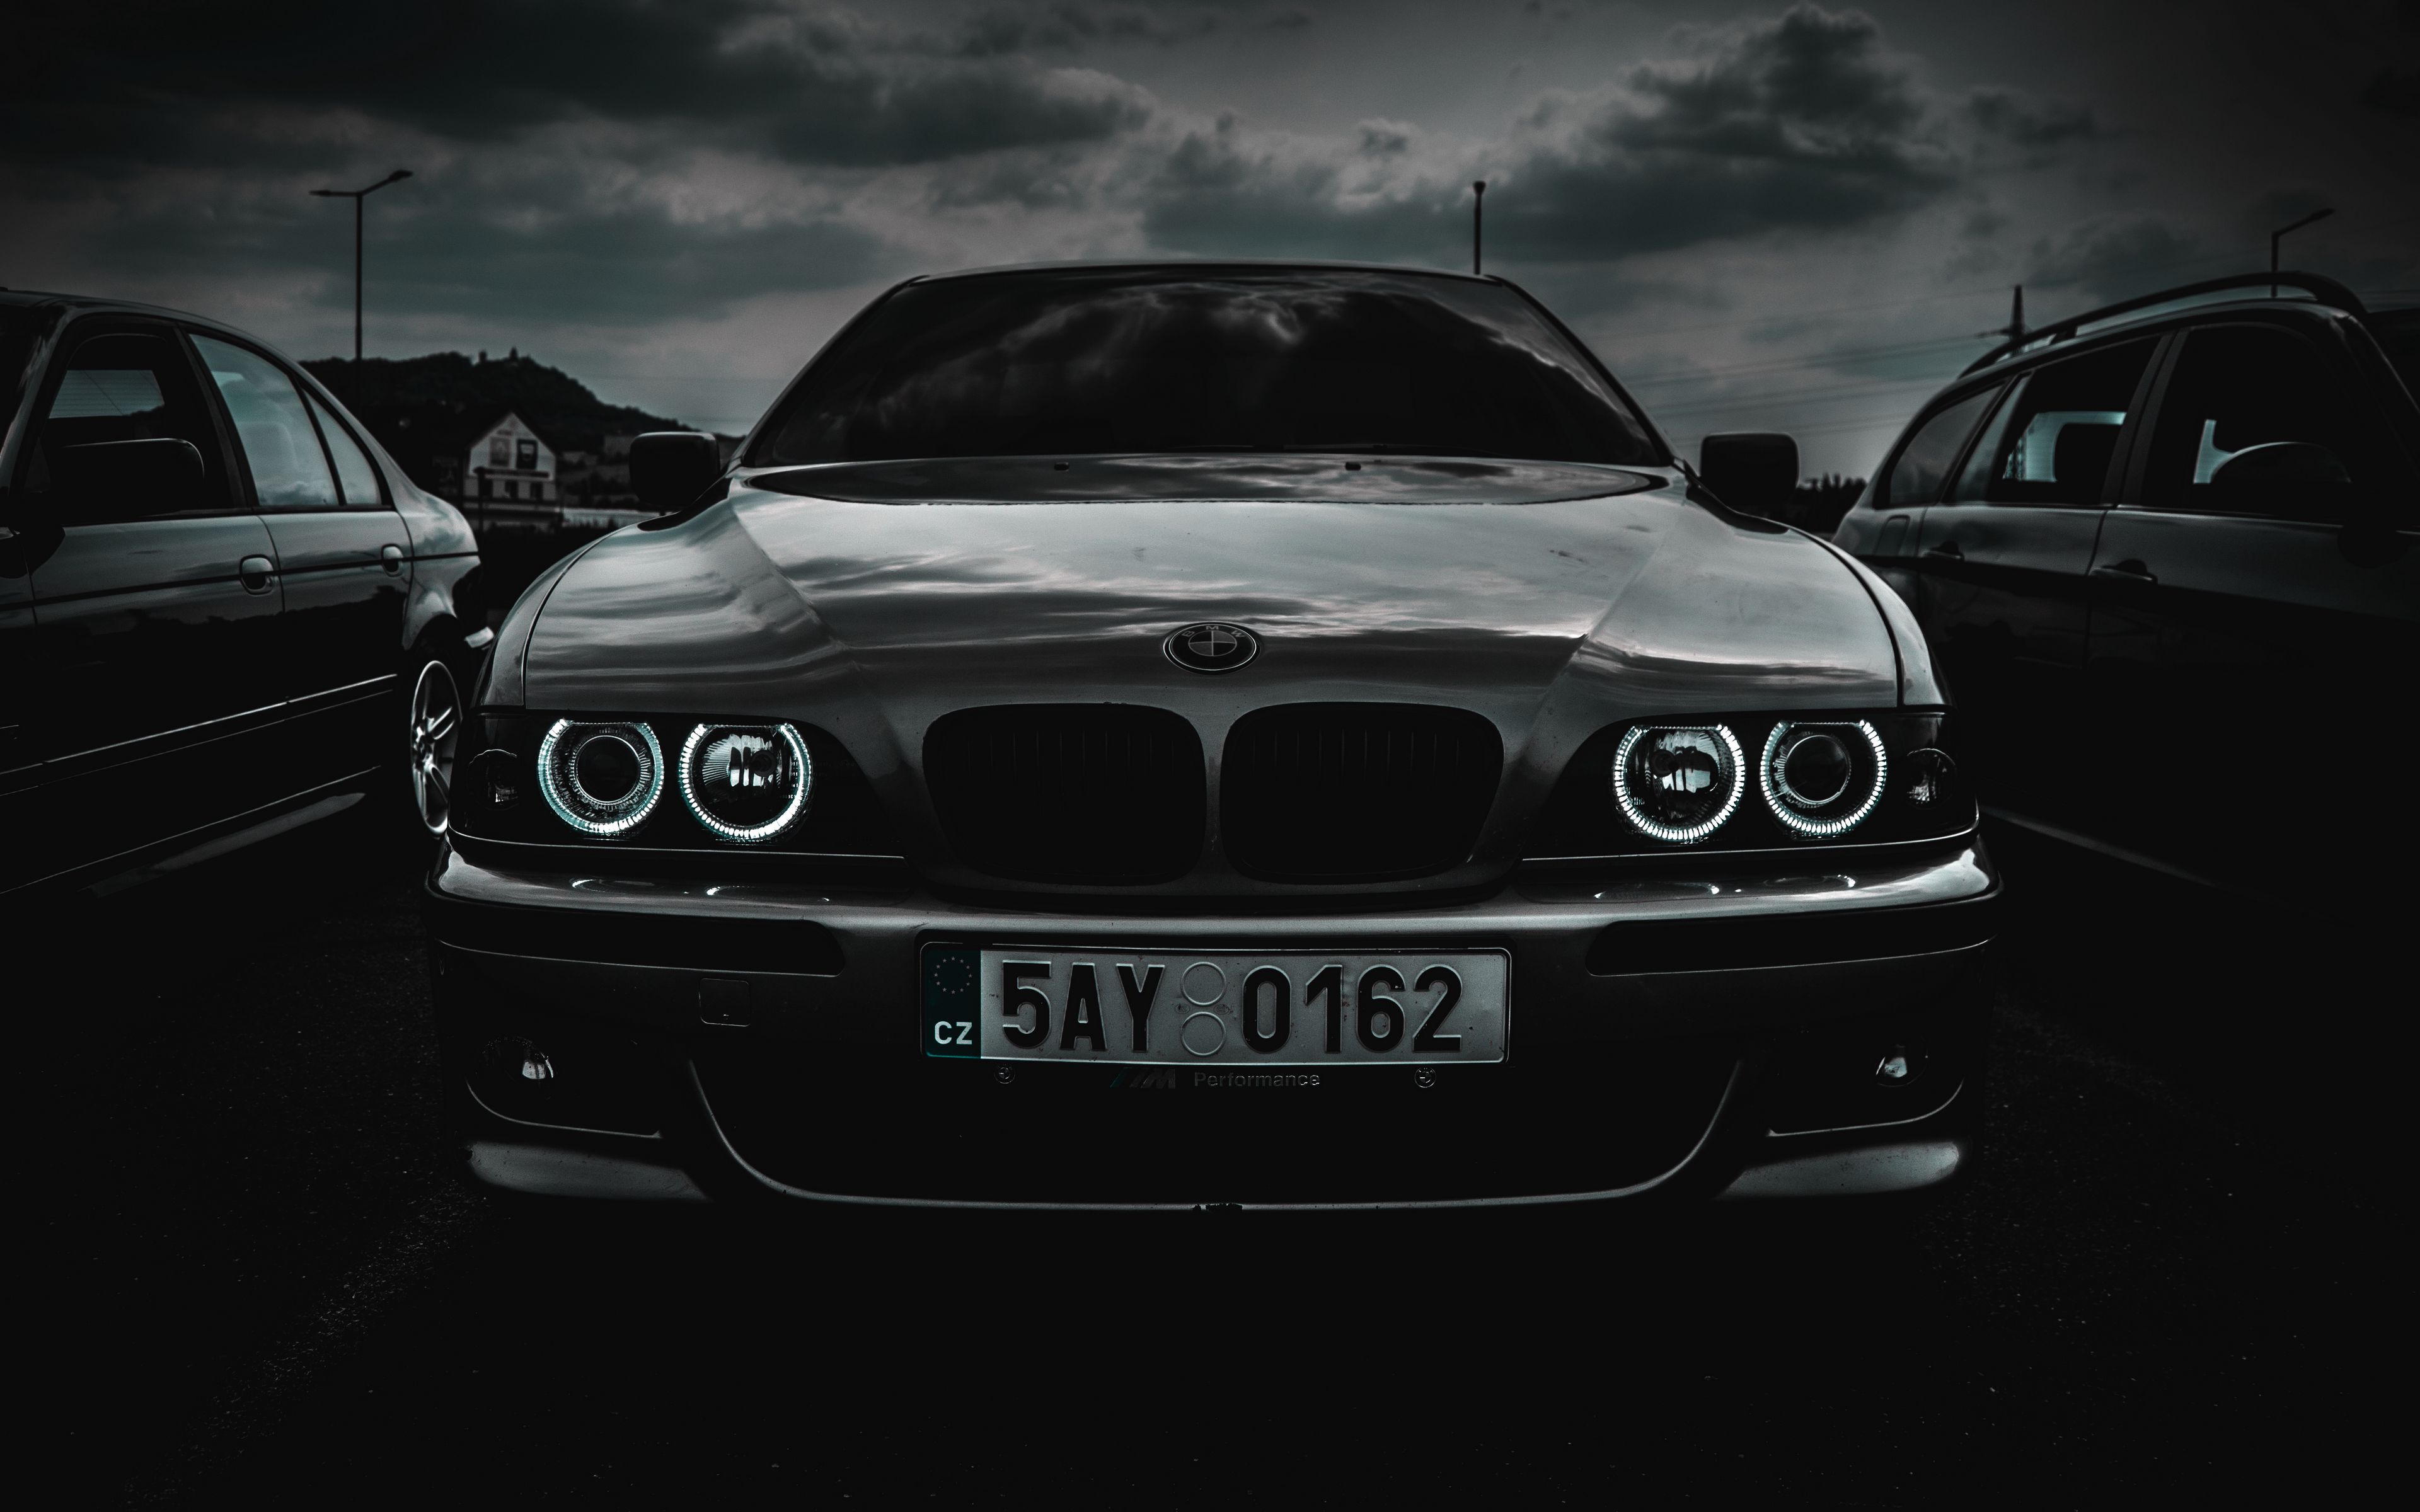 Download wallpaper 3840x2400 bmw m5, bmw, car, front view, black and white 4k  ultra hd 16:10 hd background